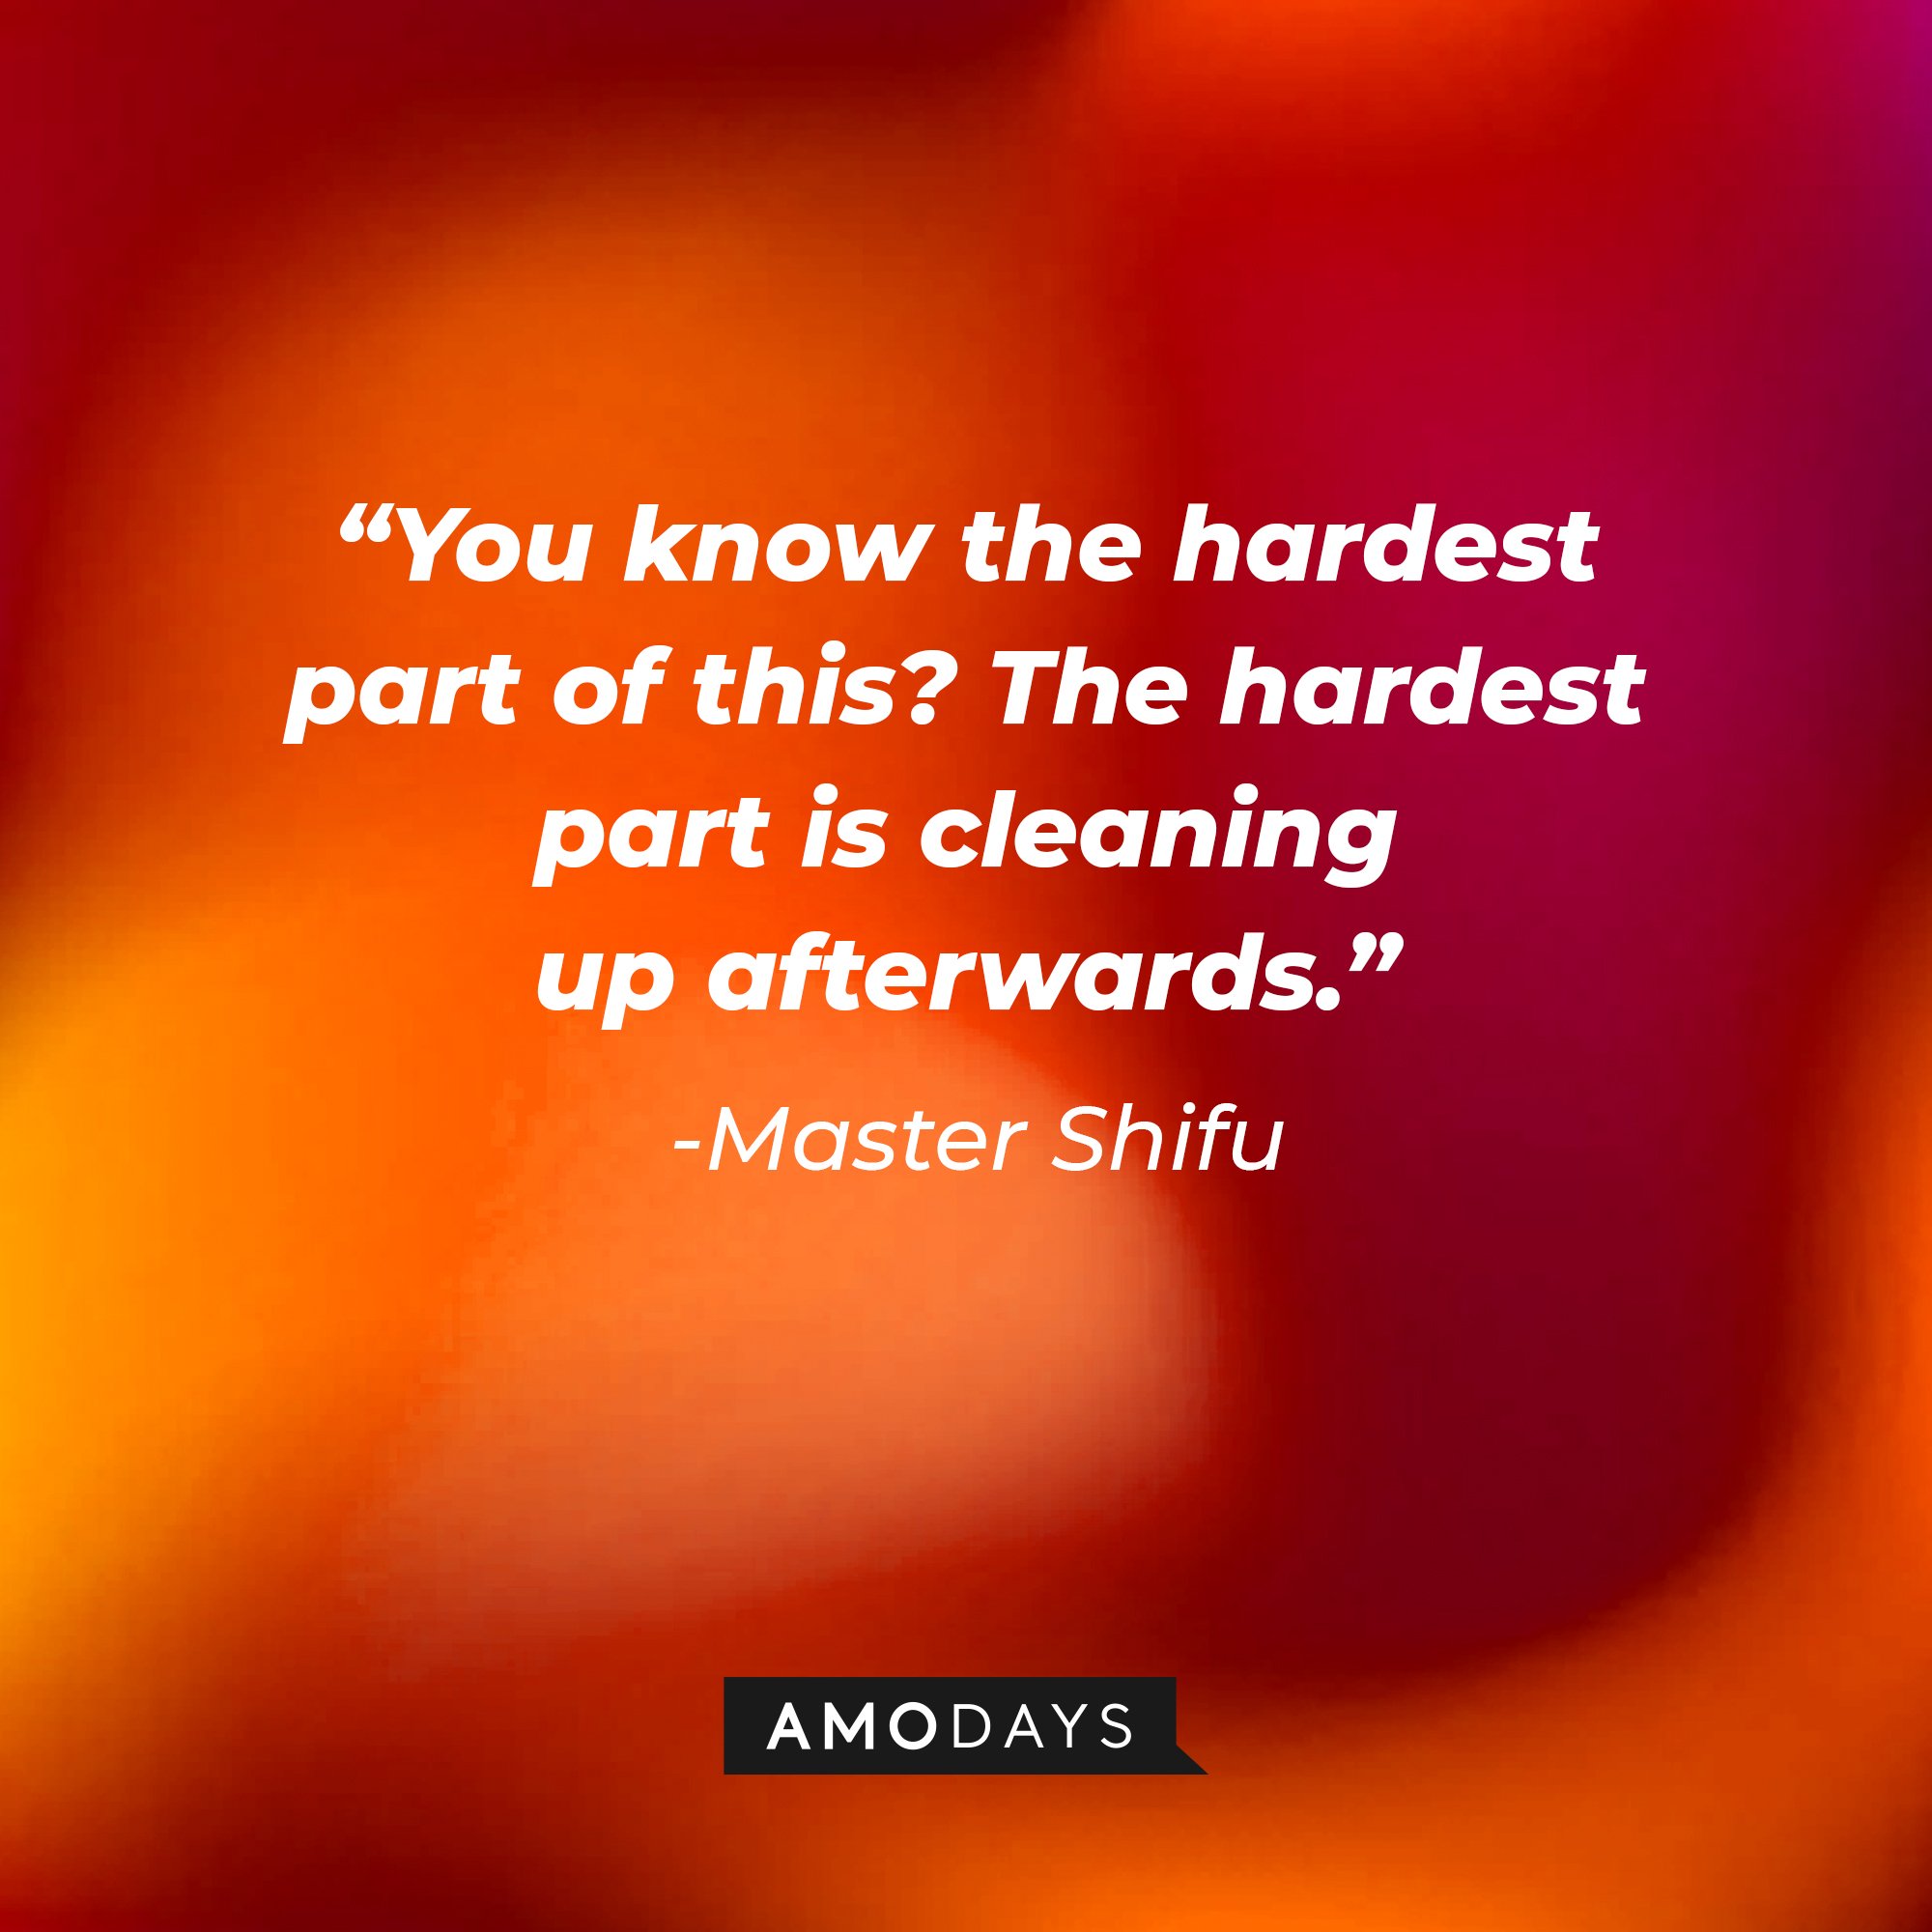  Master Shifu's quote: “You know the hardest part of this? The hardest part is cleaning up afterwards.” | Image: AmoDays